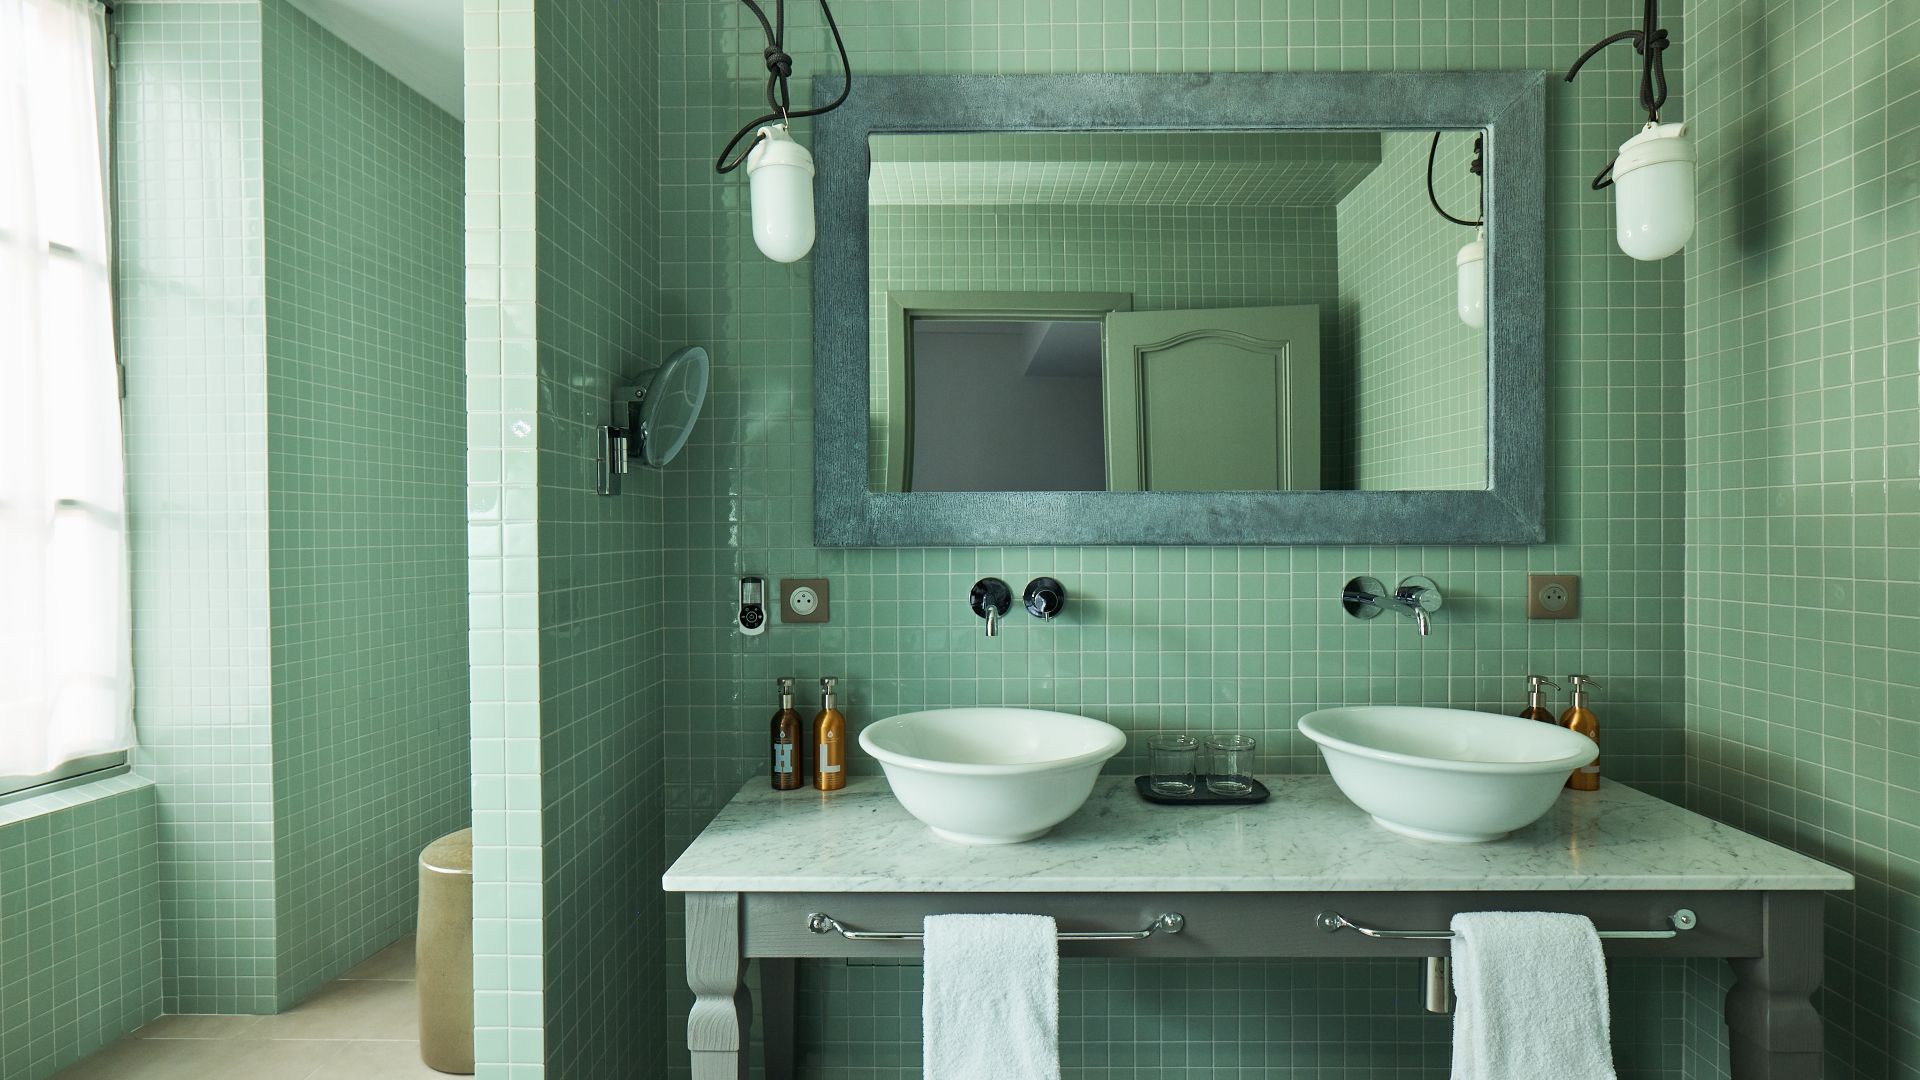 A Bathroom With A Large Mirror - Image